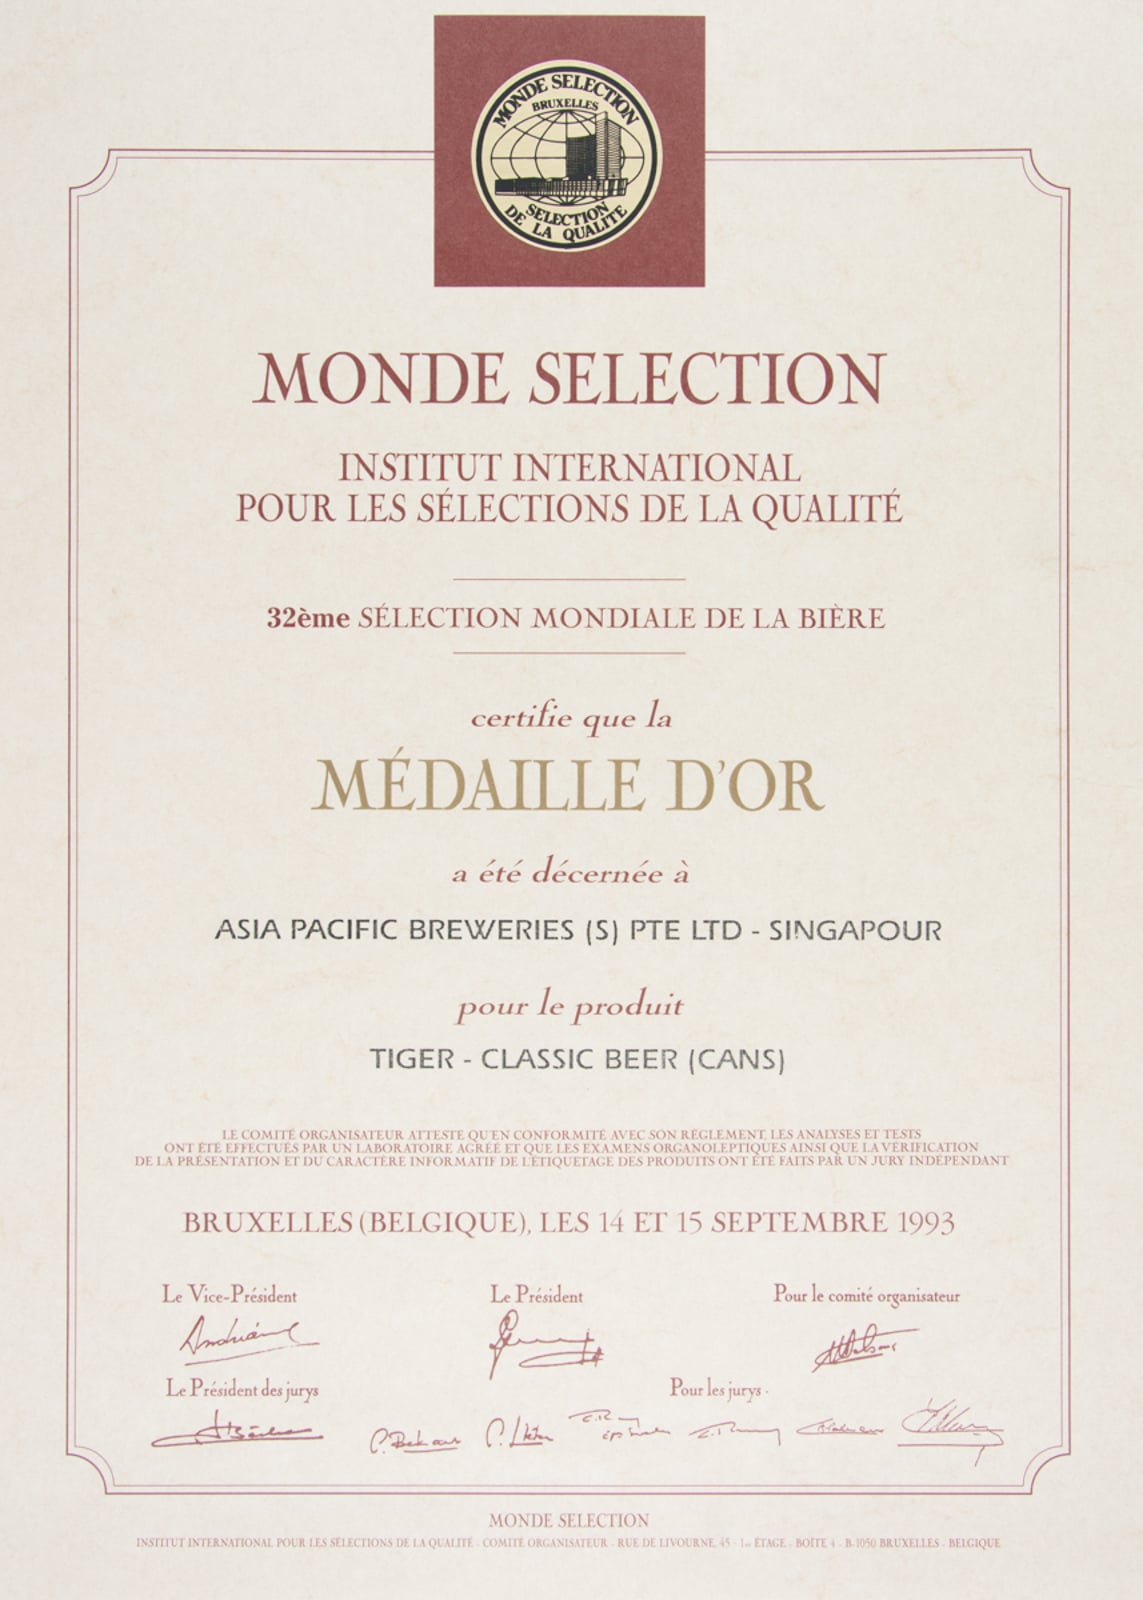 Tiger - Classic Beer (Cans) Médaille d'Or, Monde Selection Certificate 1993